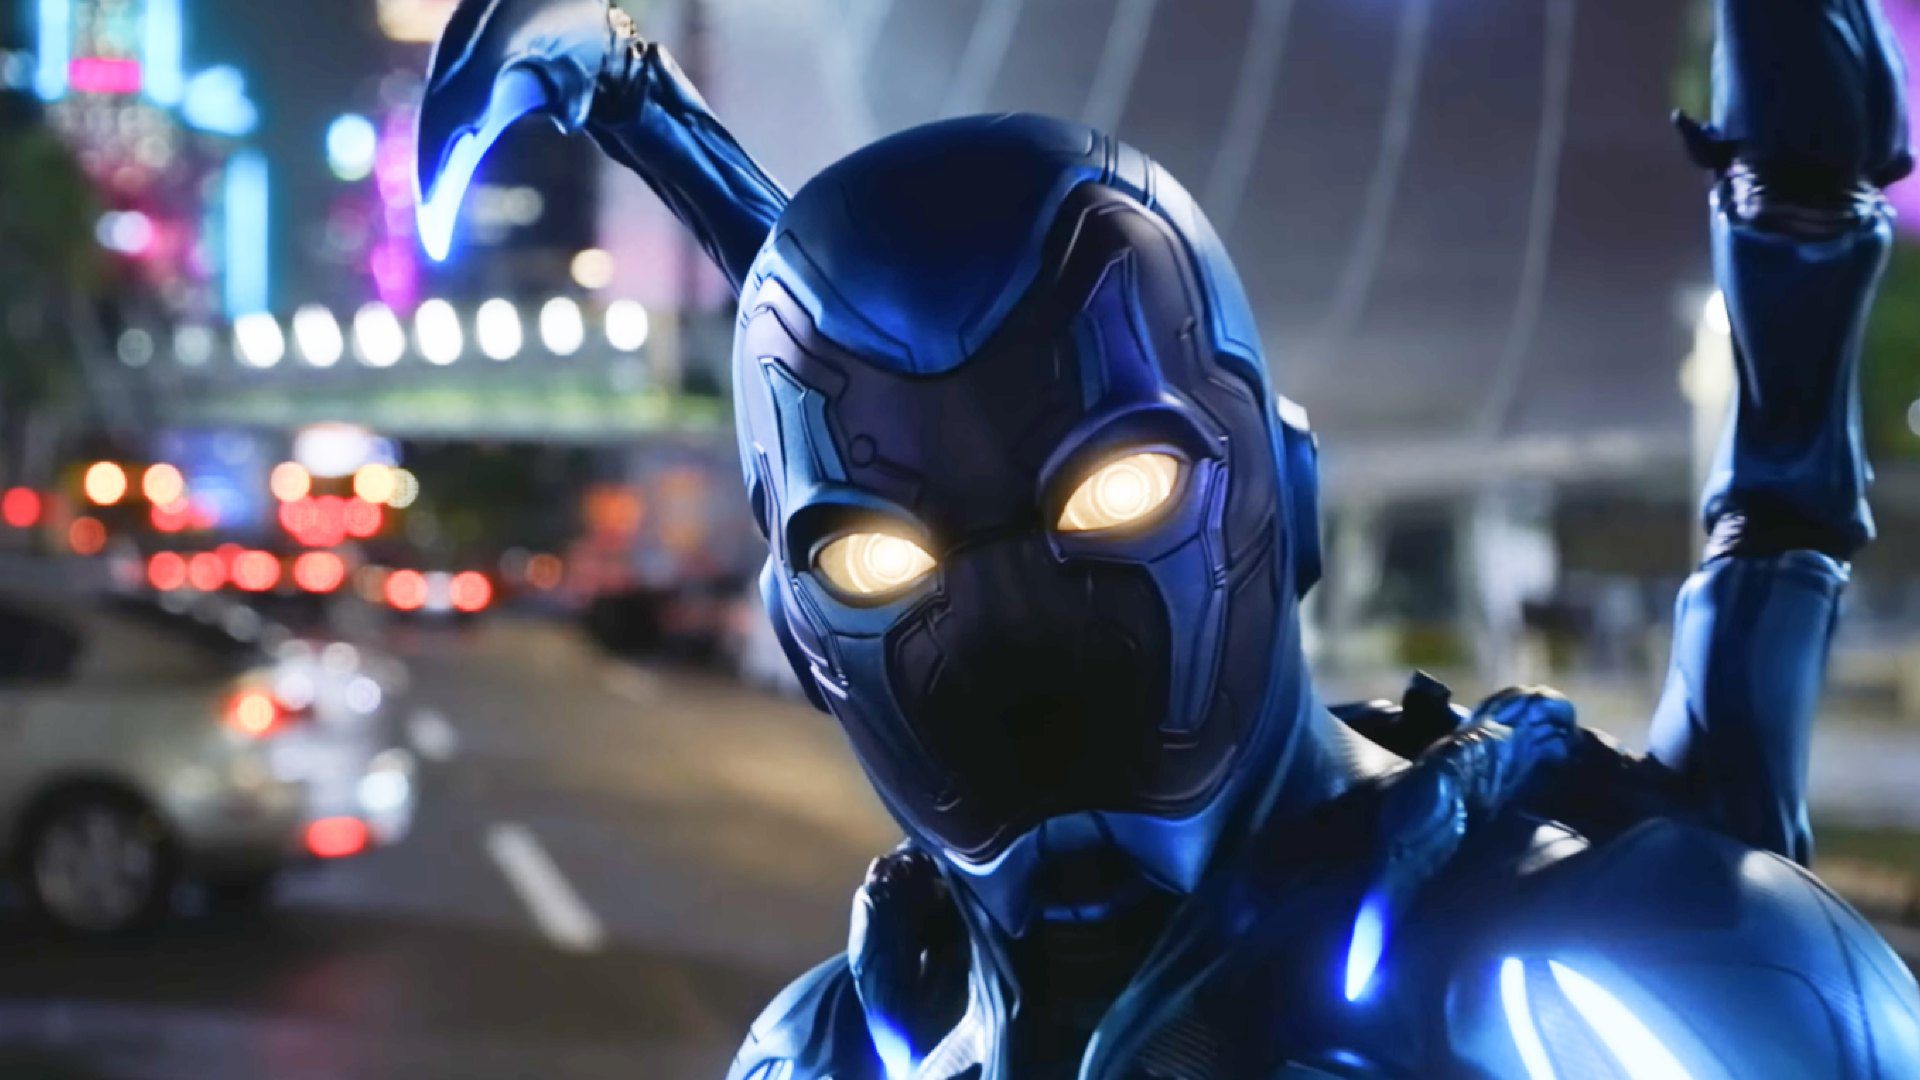 Blue Beetle' To Overtake 'Barbie' At Weekend Box Office, 'Strays